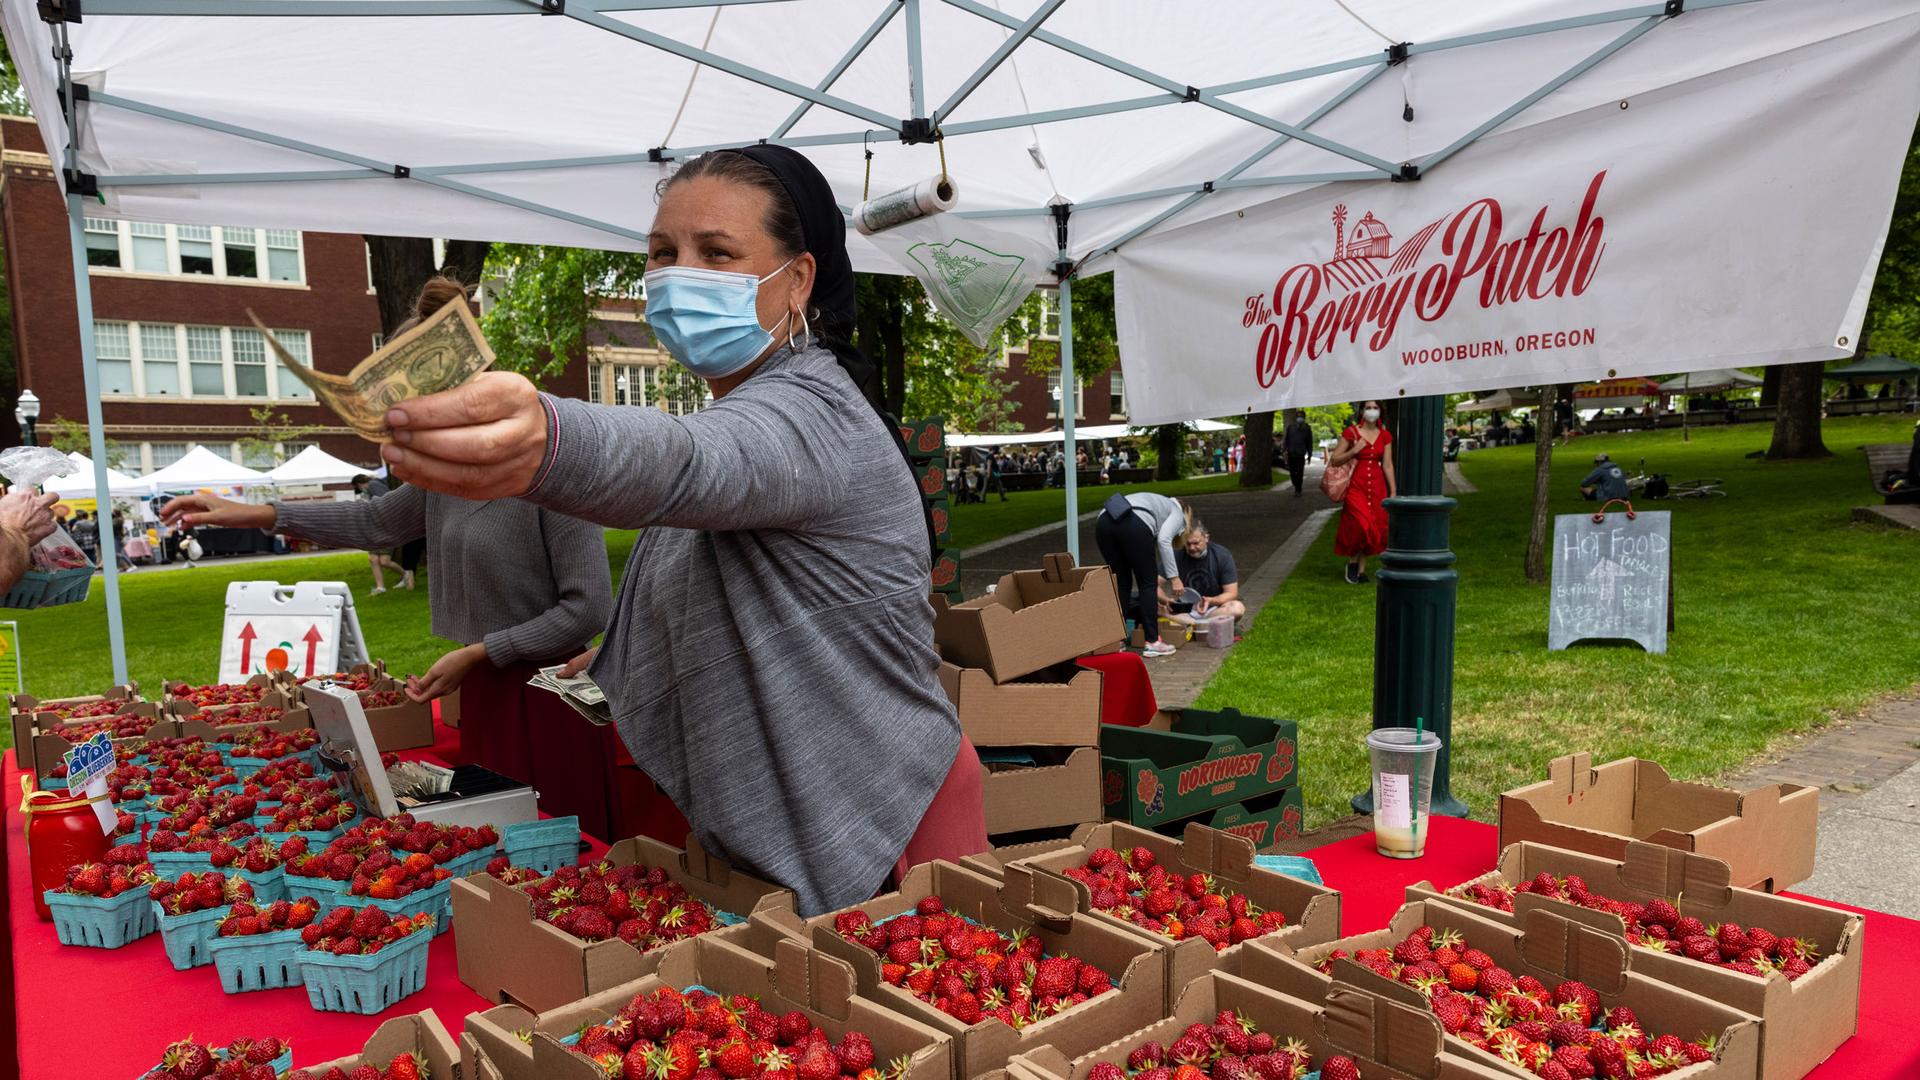 Nancy Sharabarin hands money to a customer buying strawberries at the Saturday farmers market as business opens up with a successful vaccination campaign in Portland, Oregon, Saturday, June 5, 2021.